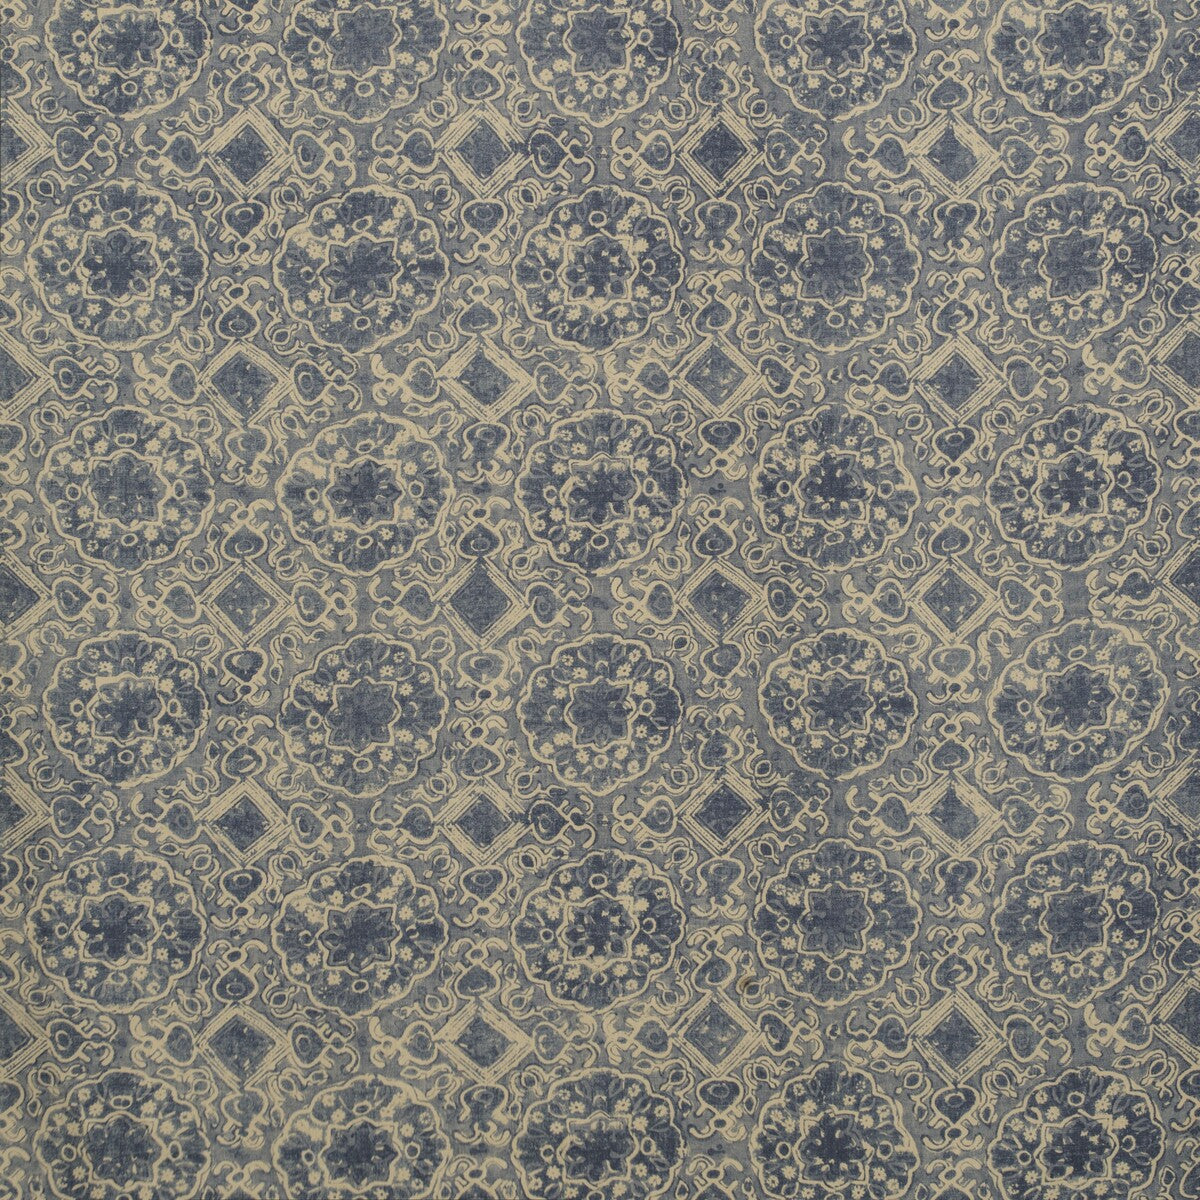 Ashcombe fabric in blue color - pattern BFC-3652.5.0 - by Lee Jofa in the Blithfield collection